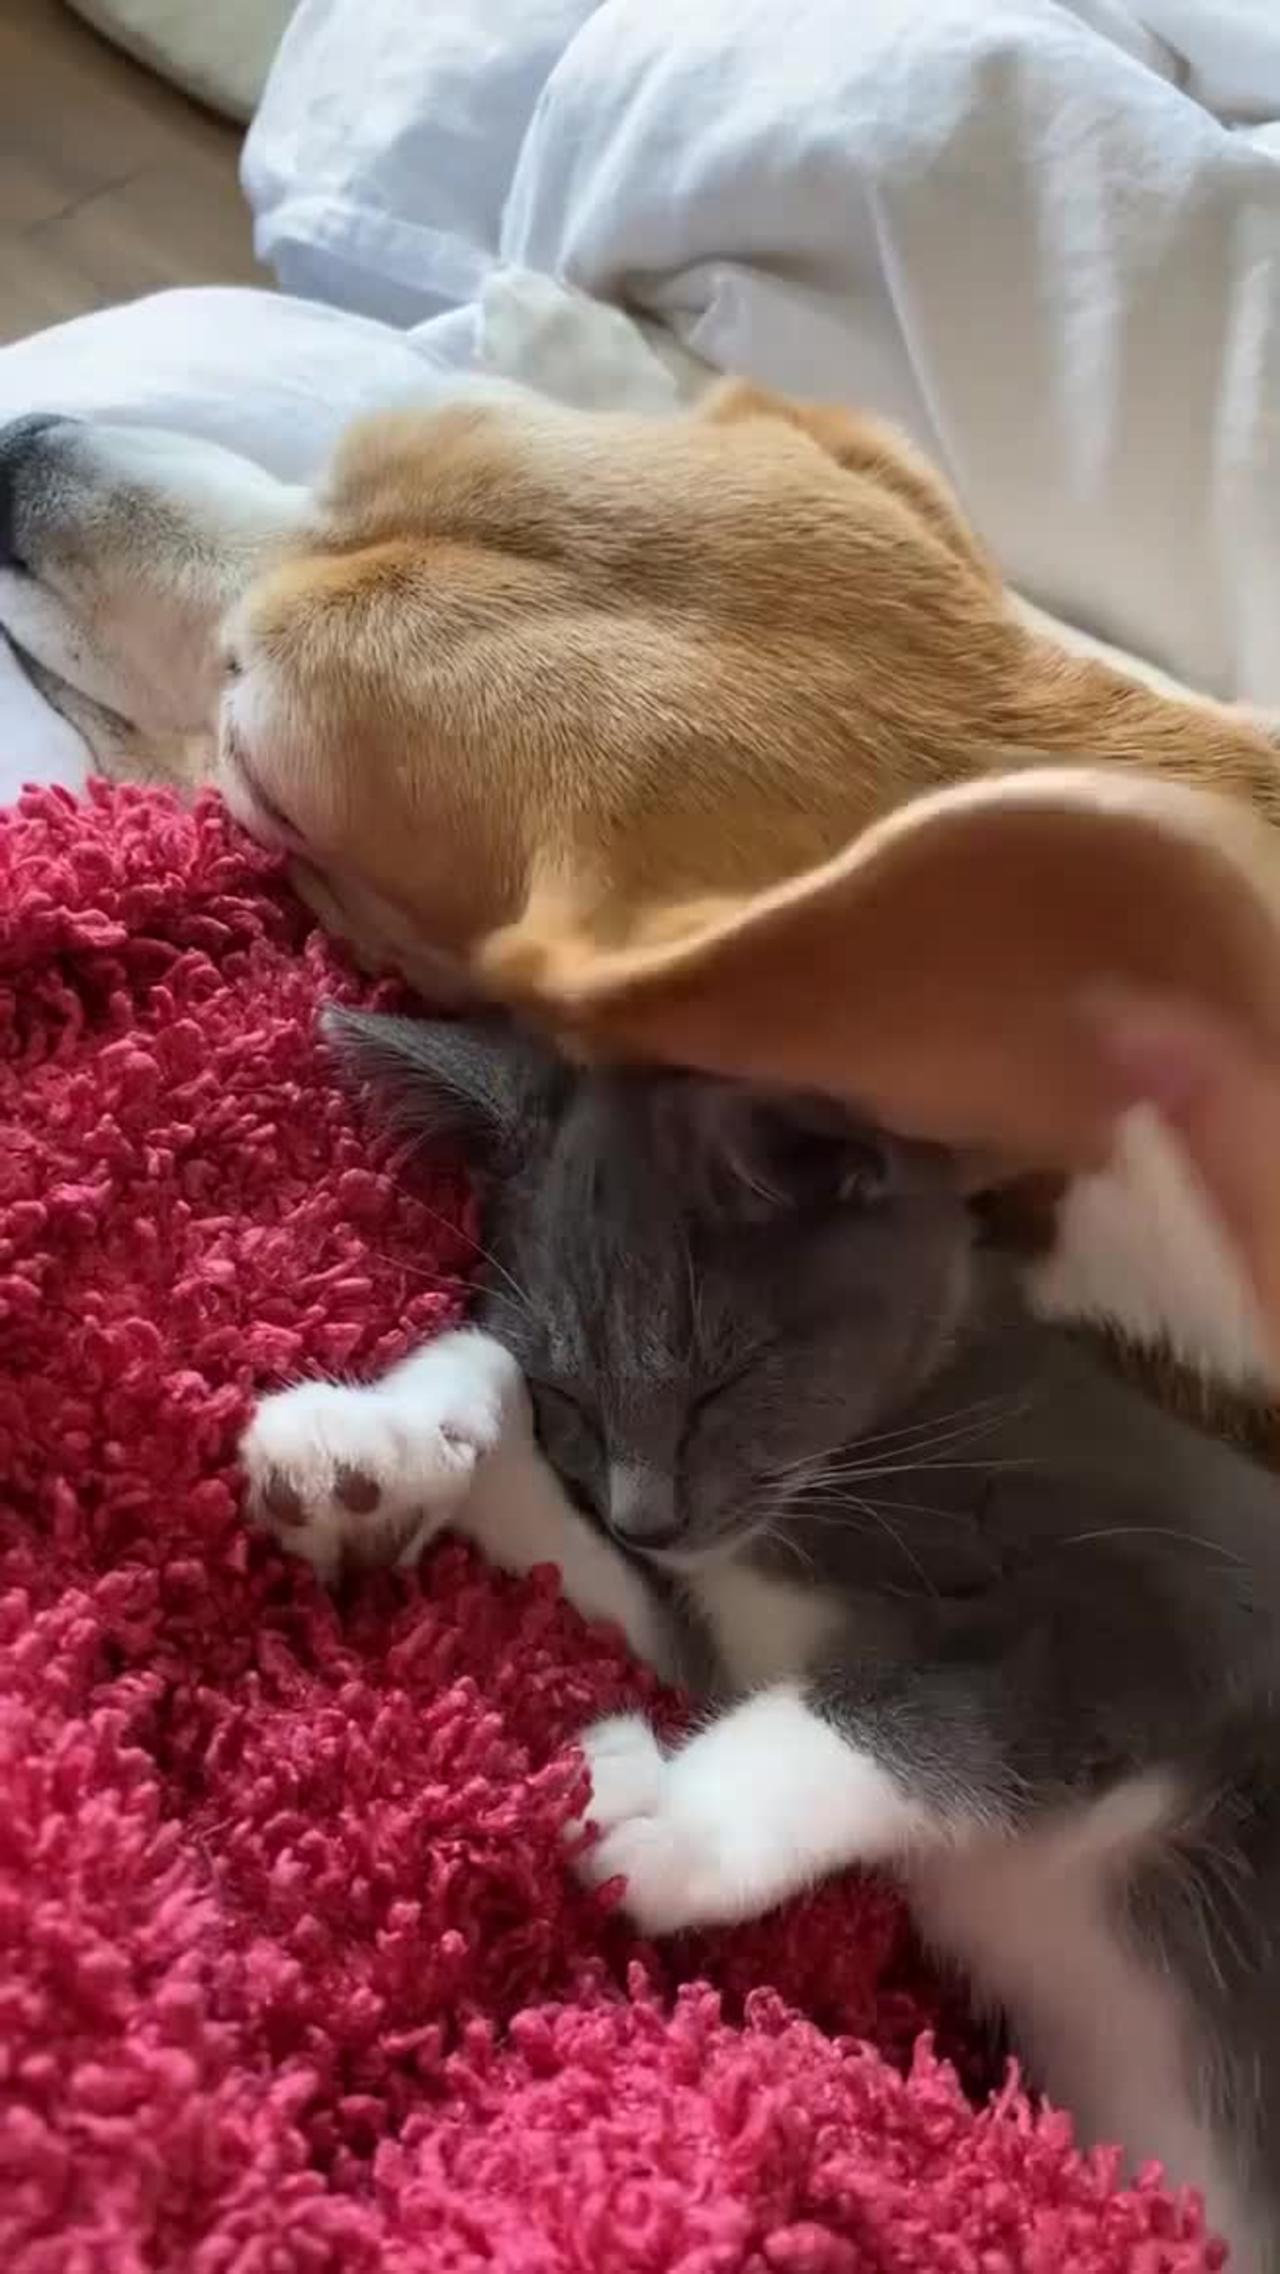 Cat using the dogs ears to blanket 😍🥰